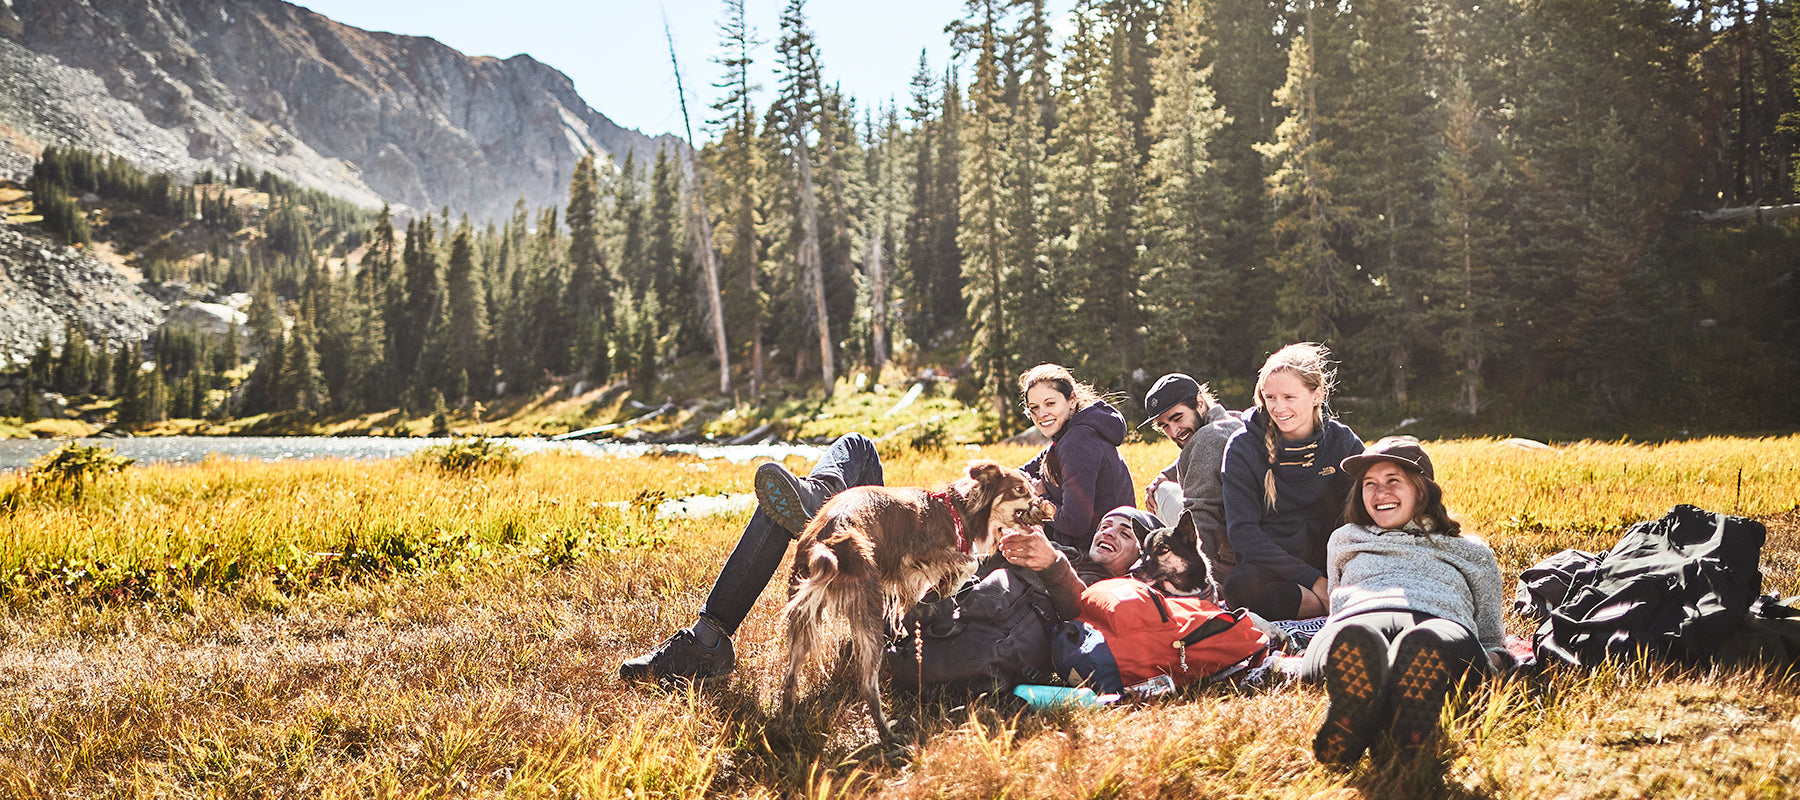 Group of hikers in the forest resting in the sun with a dog